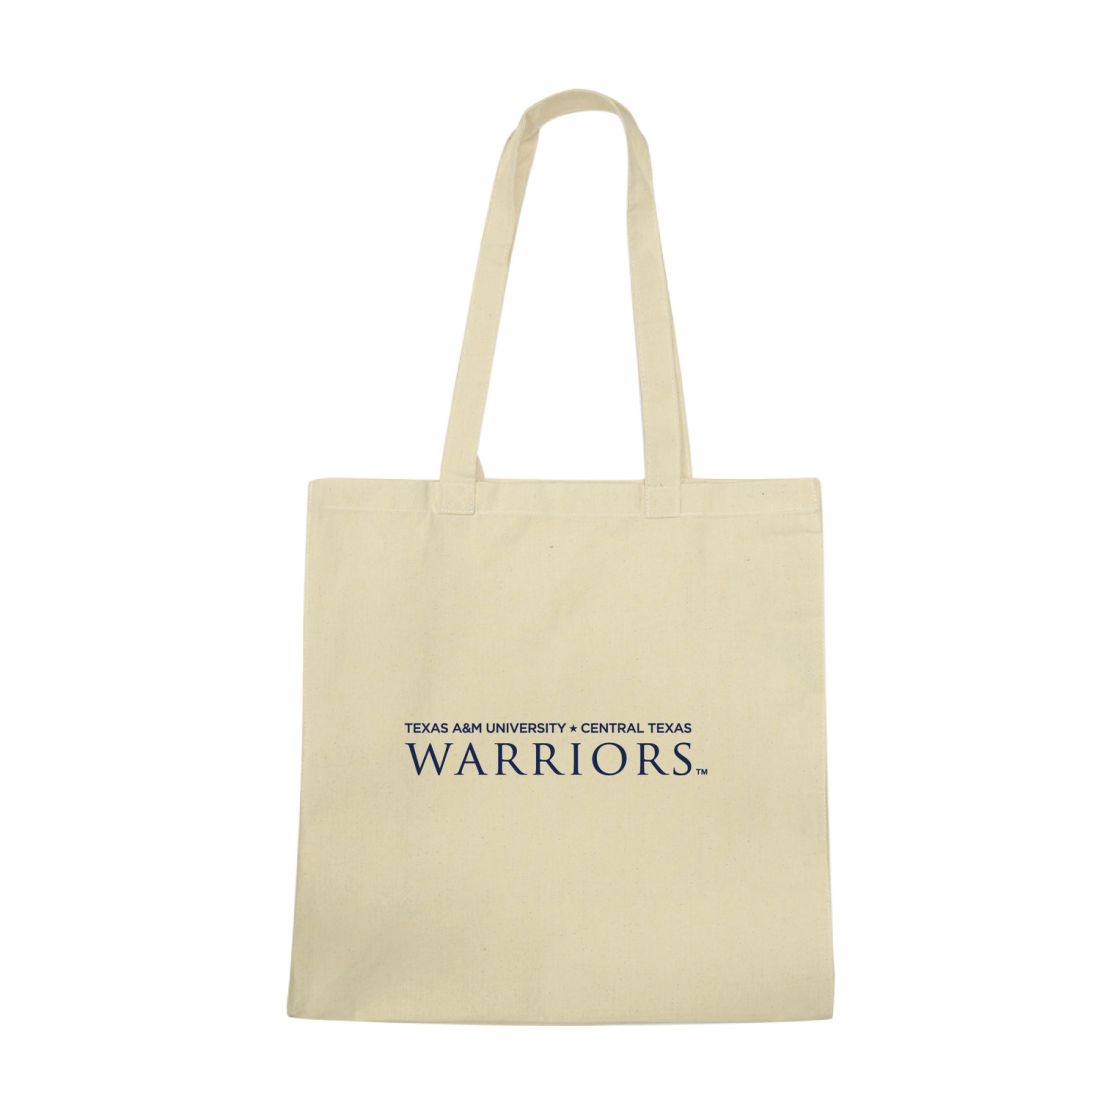 Texas A&M University-Central Texas Warriors Institutional Tote Bag